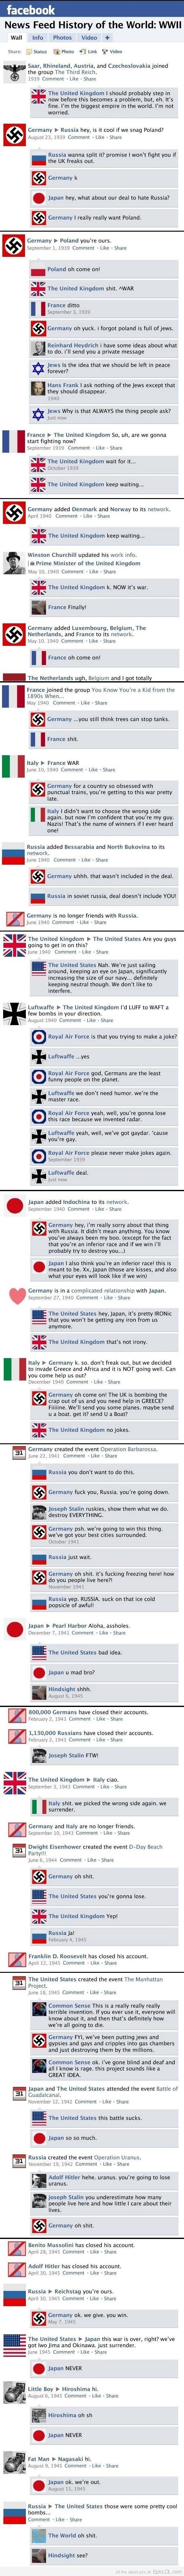 If Facebook Existed During World War 